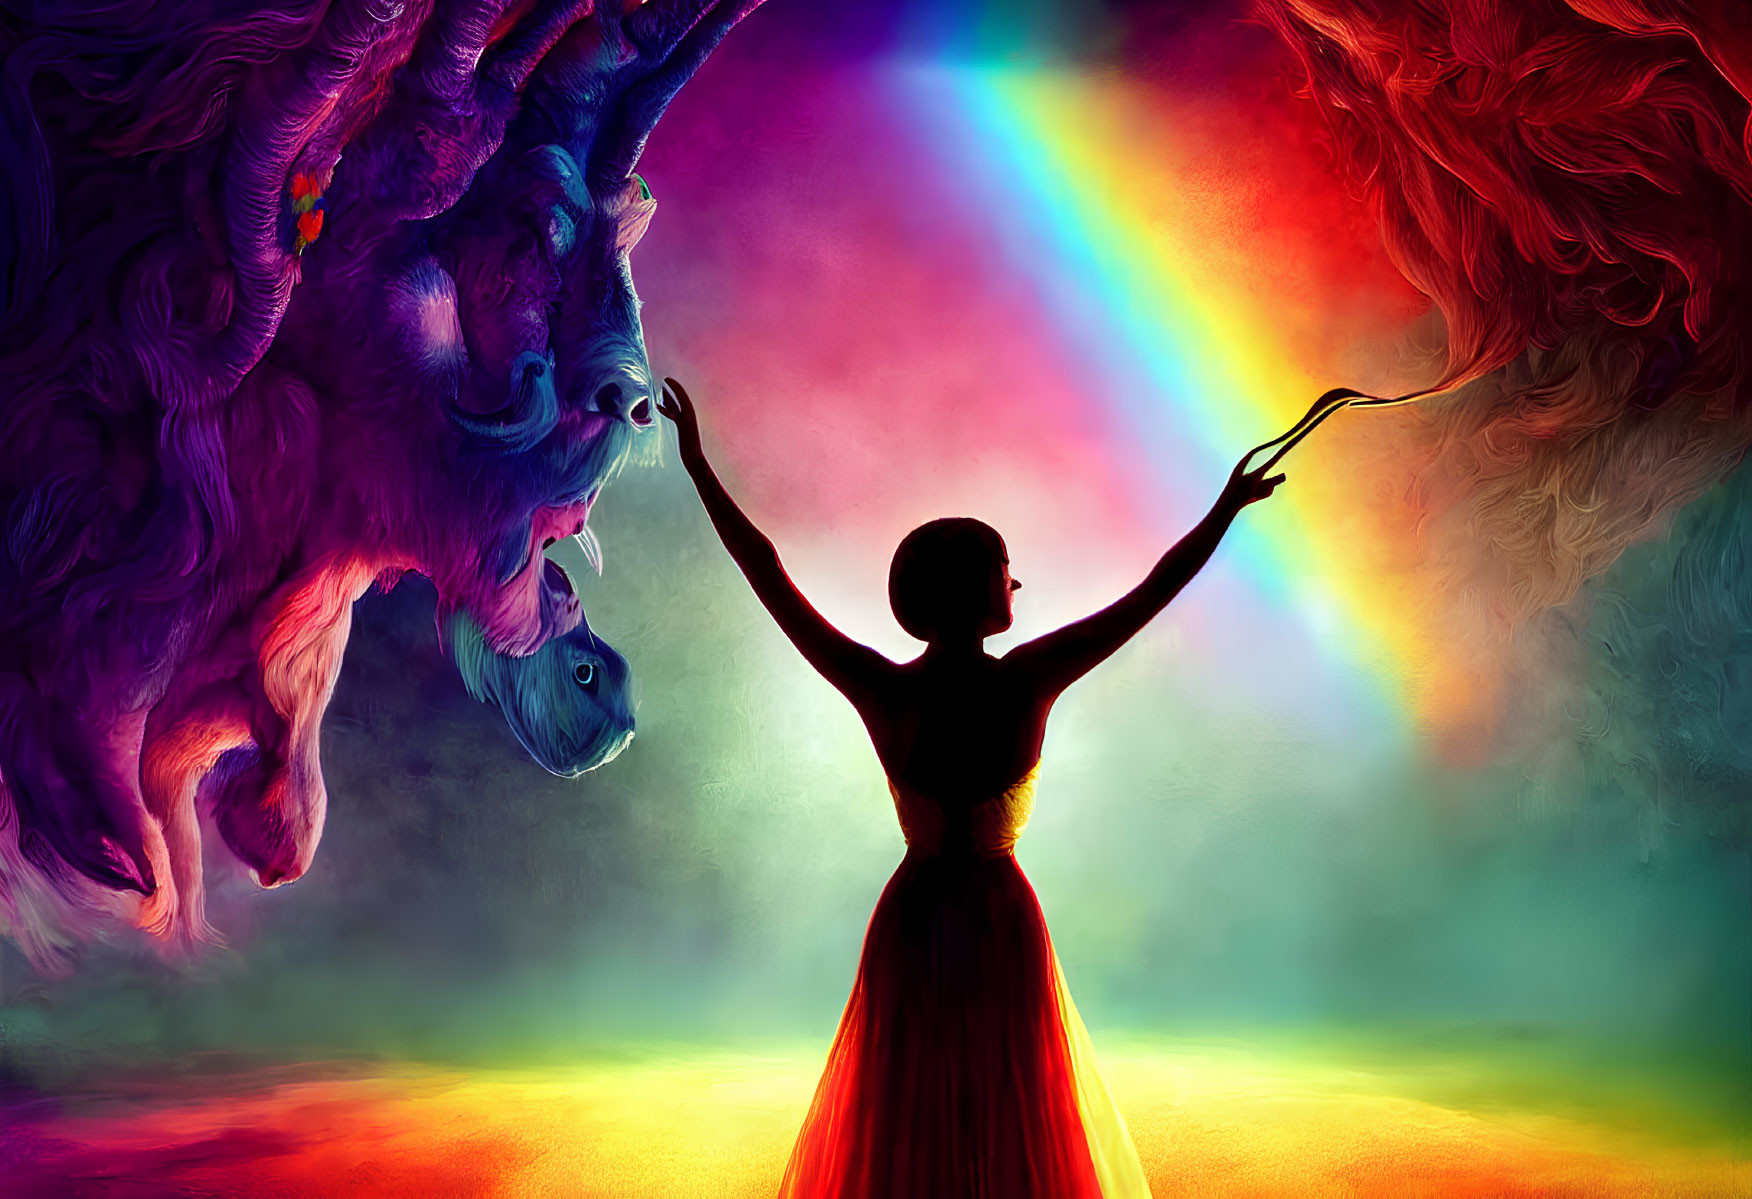 Woman with outstretched arms between lion and wolf under rainbow on vibrant background